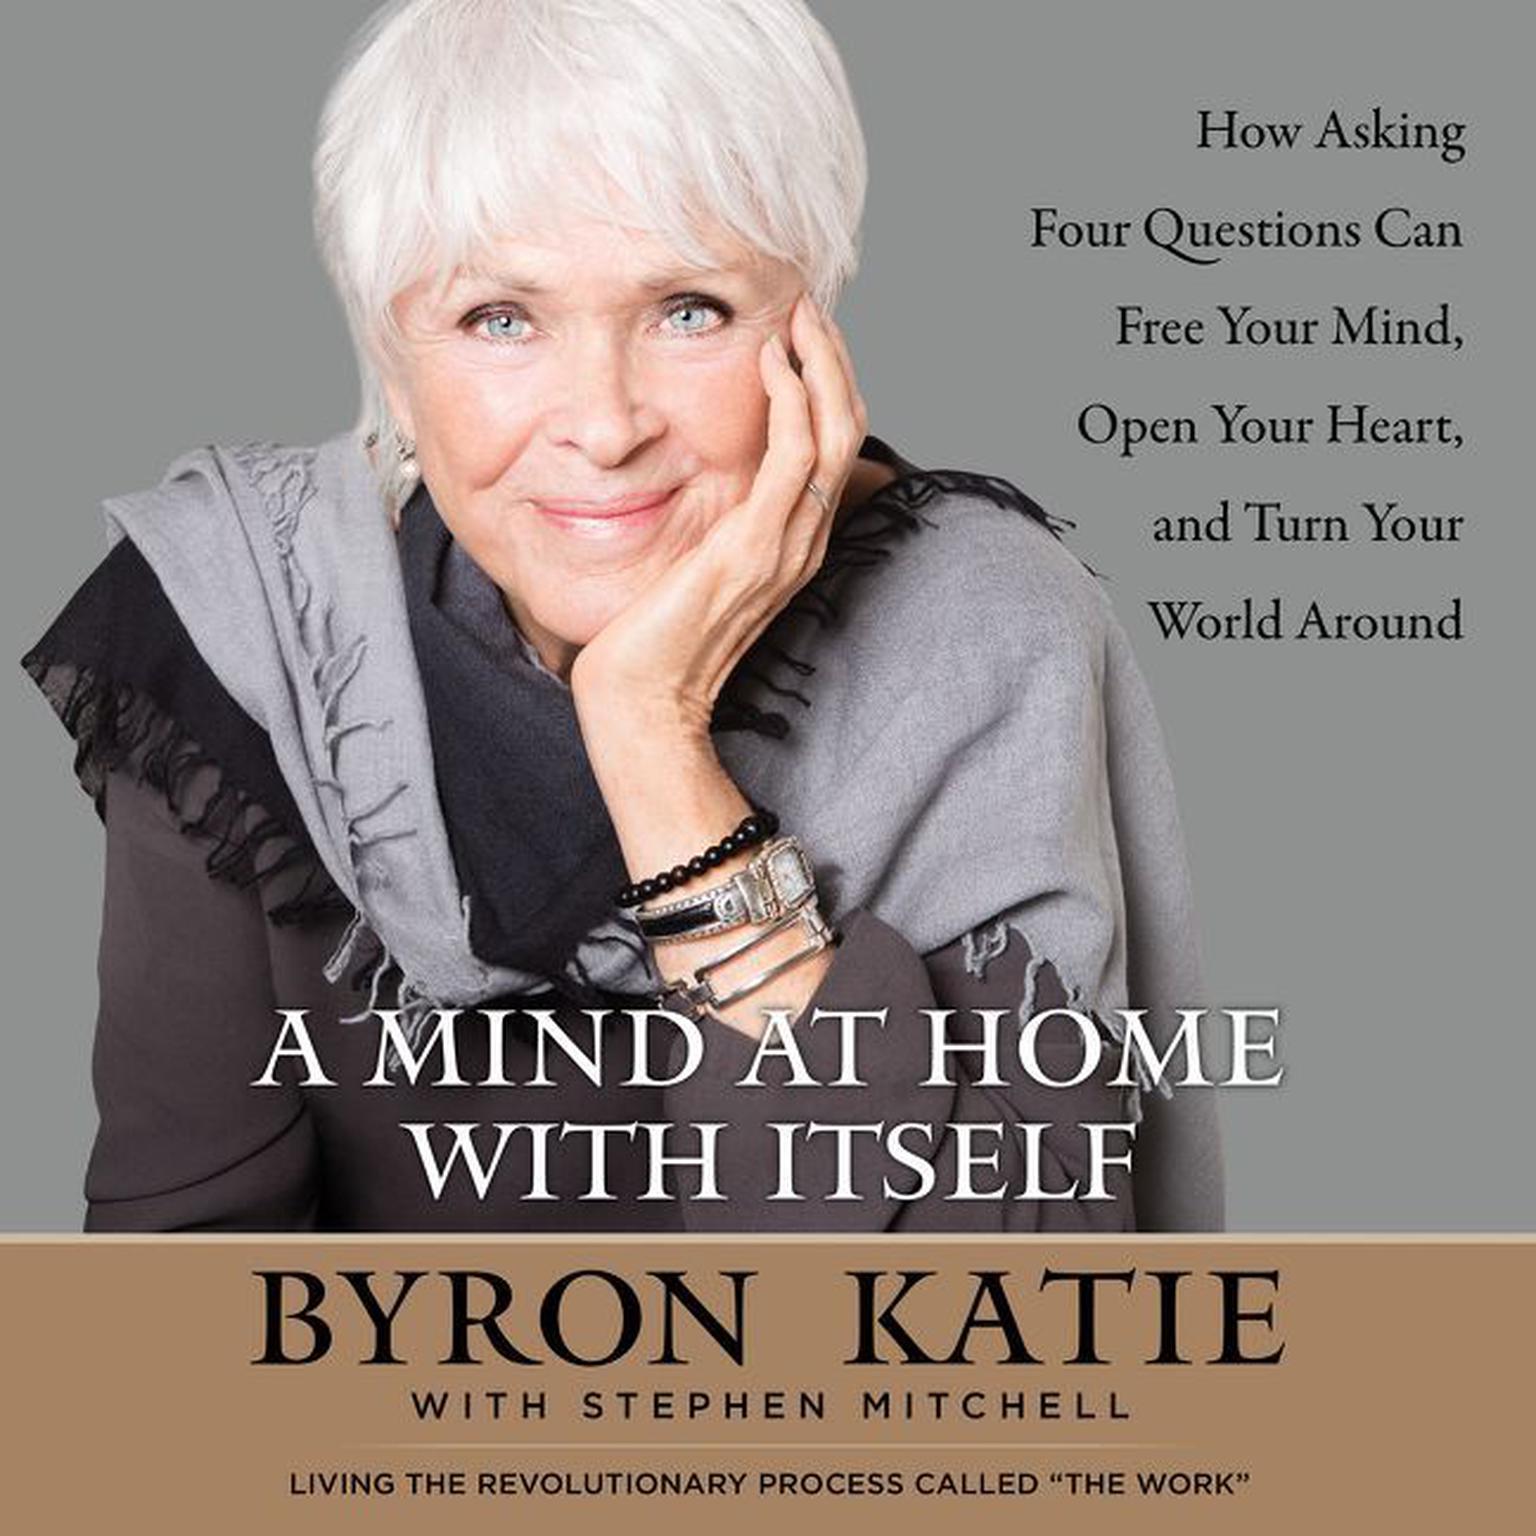 A Mind at Home with Itself (Abridged): How Asking Four Questions Can Free Your Mind, Open Your Heart, and Turn Your World Around Audiobook, by Byron Katie